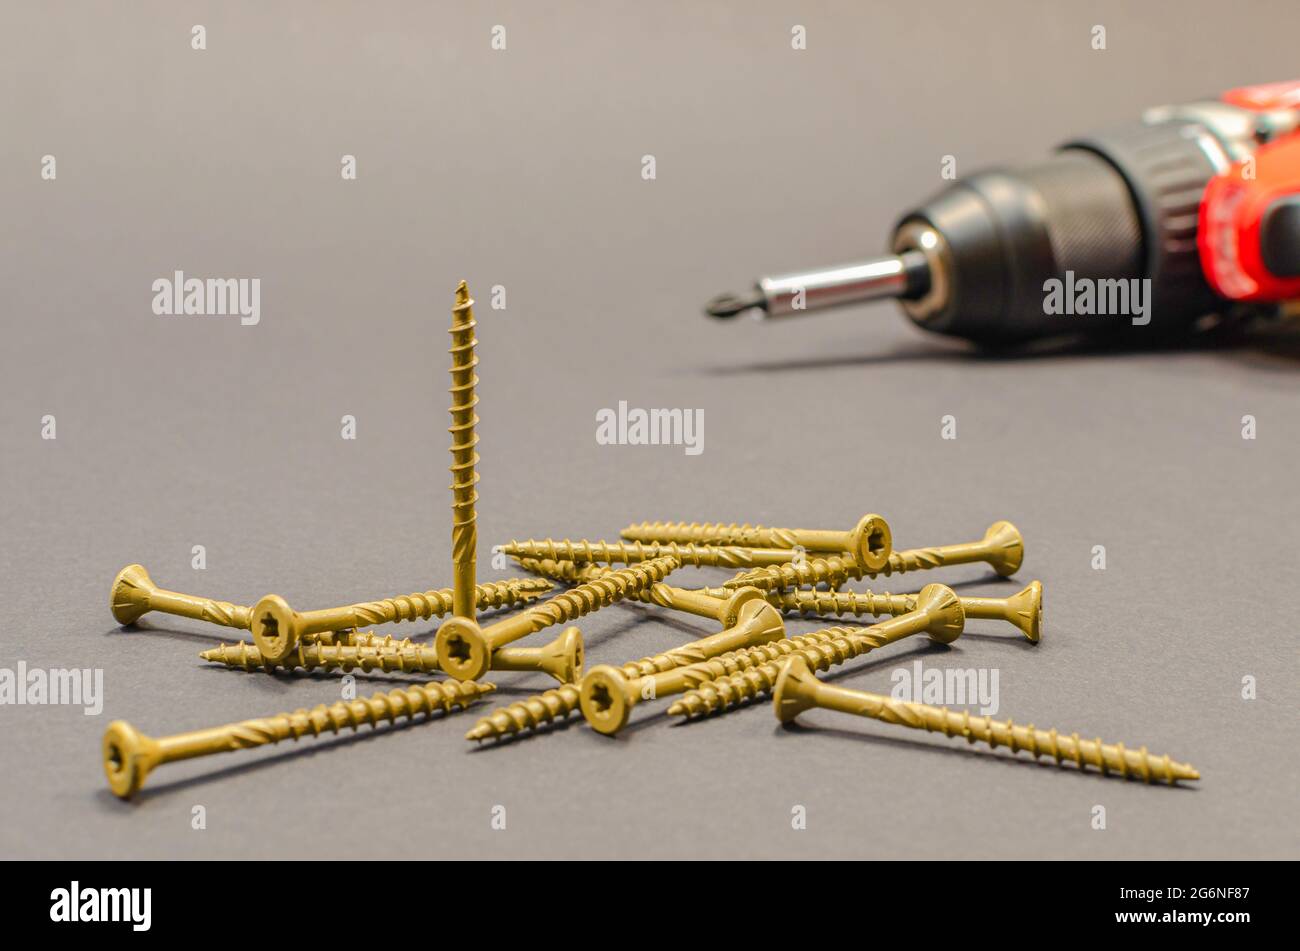 Self-tapping screws on the background of a battery screwdriver, a selection of different self-tapping screws on a black background. Stock Photo